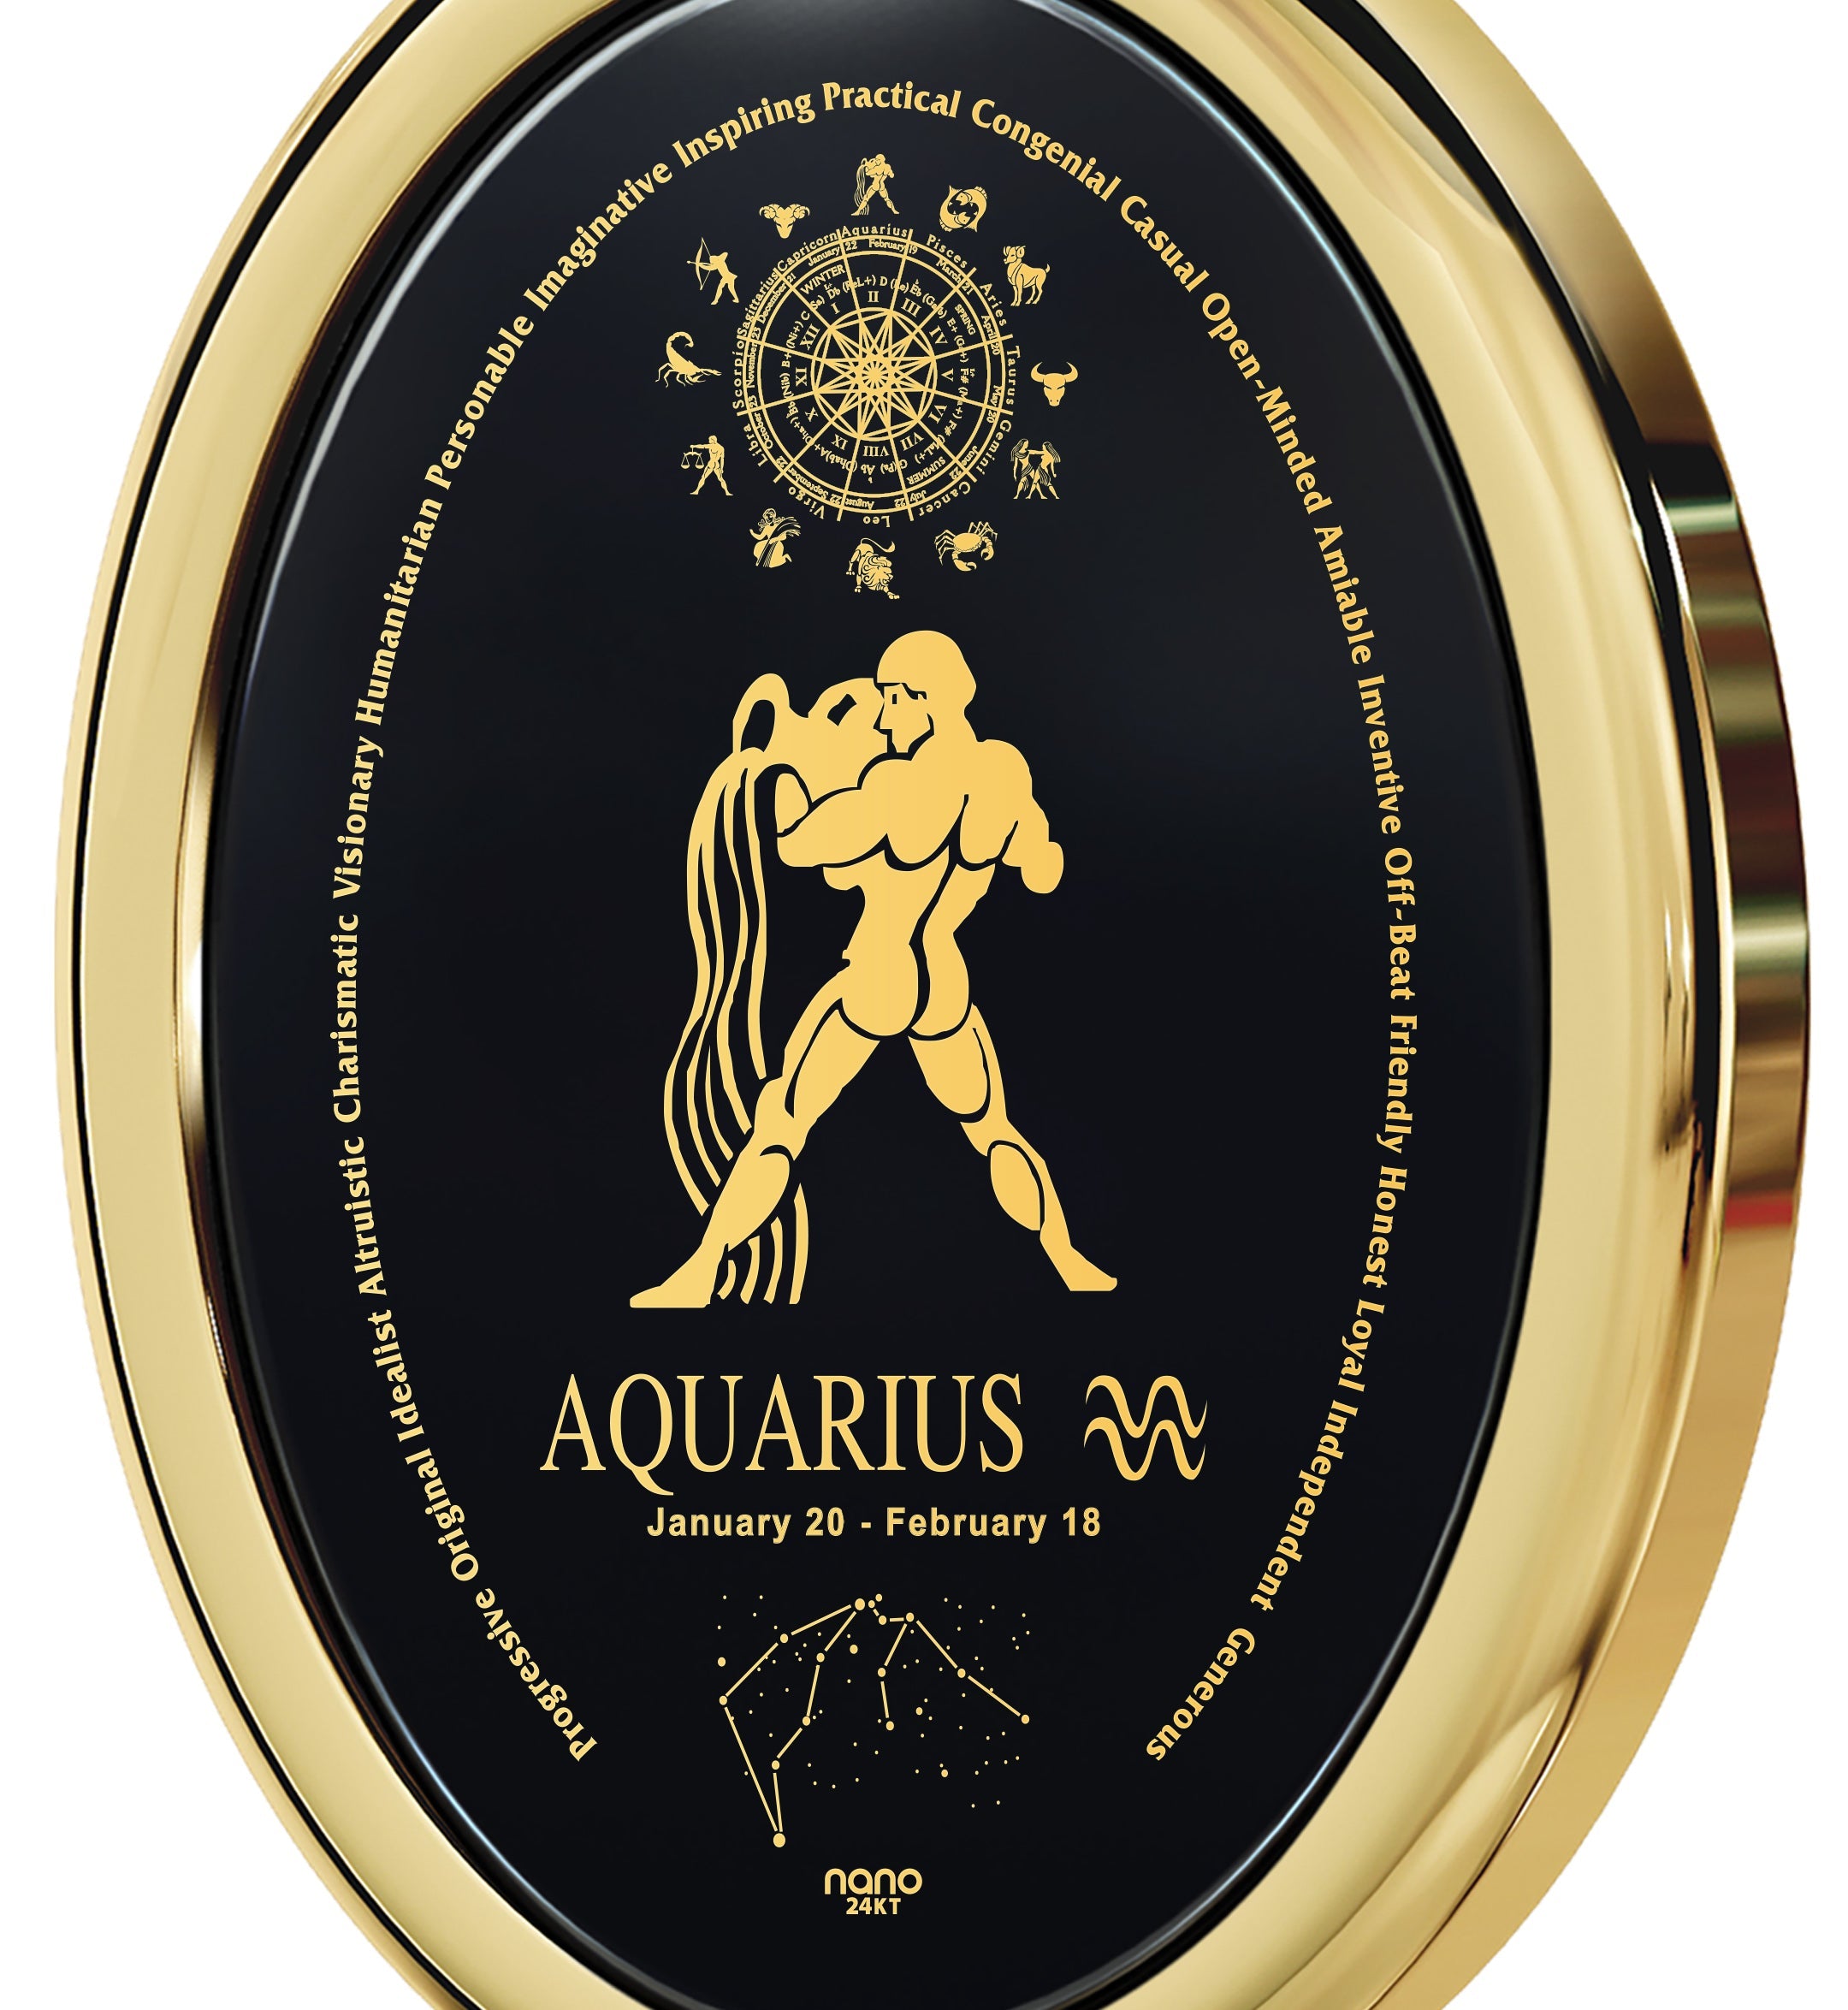 Circular design of an Aquarius Necklace Zodiac Pendant on a necklace featuring the water-bearer symbol and constellation with decorative elements and texts detailing personality traits, all beautifully crafted in 24k gold inscribed on Onyx Stone.